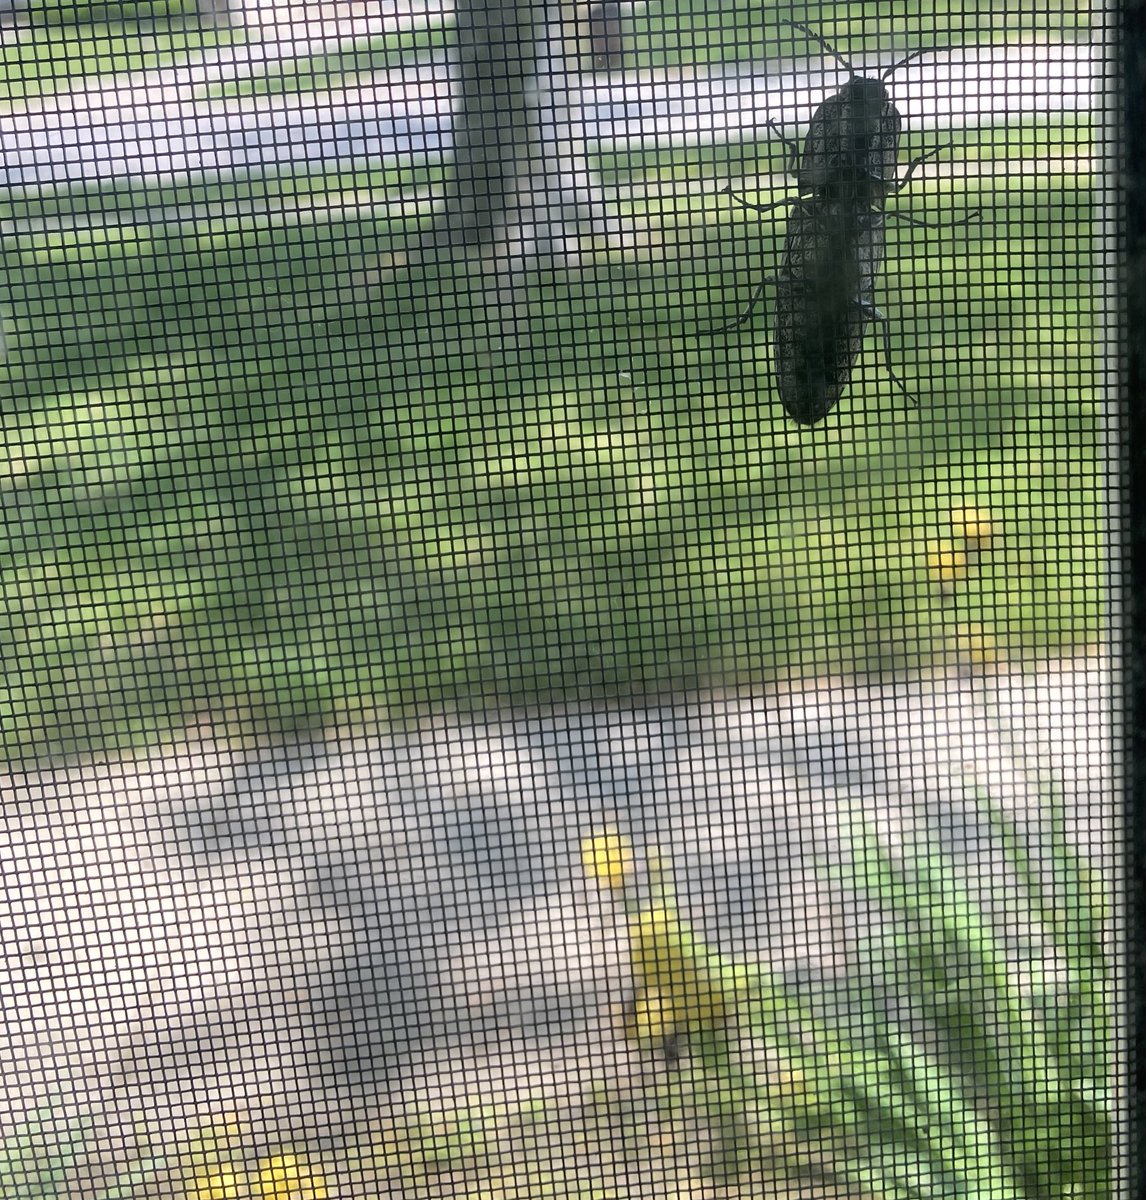 What kind of bug is this!? It’s huge.